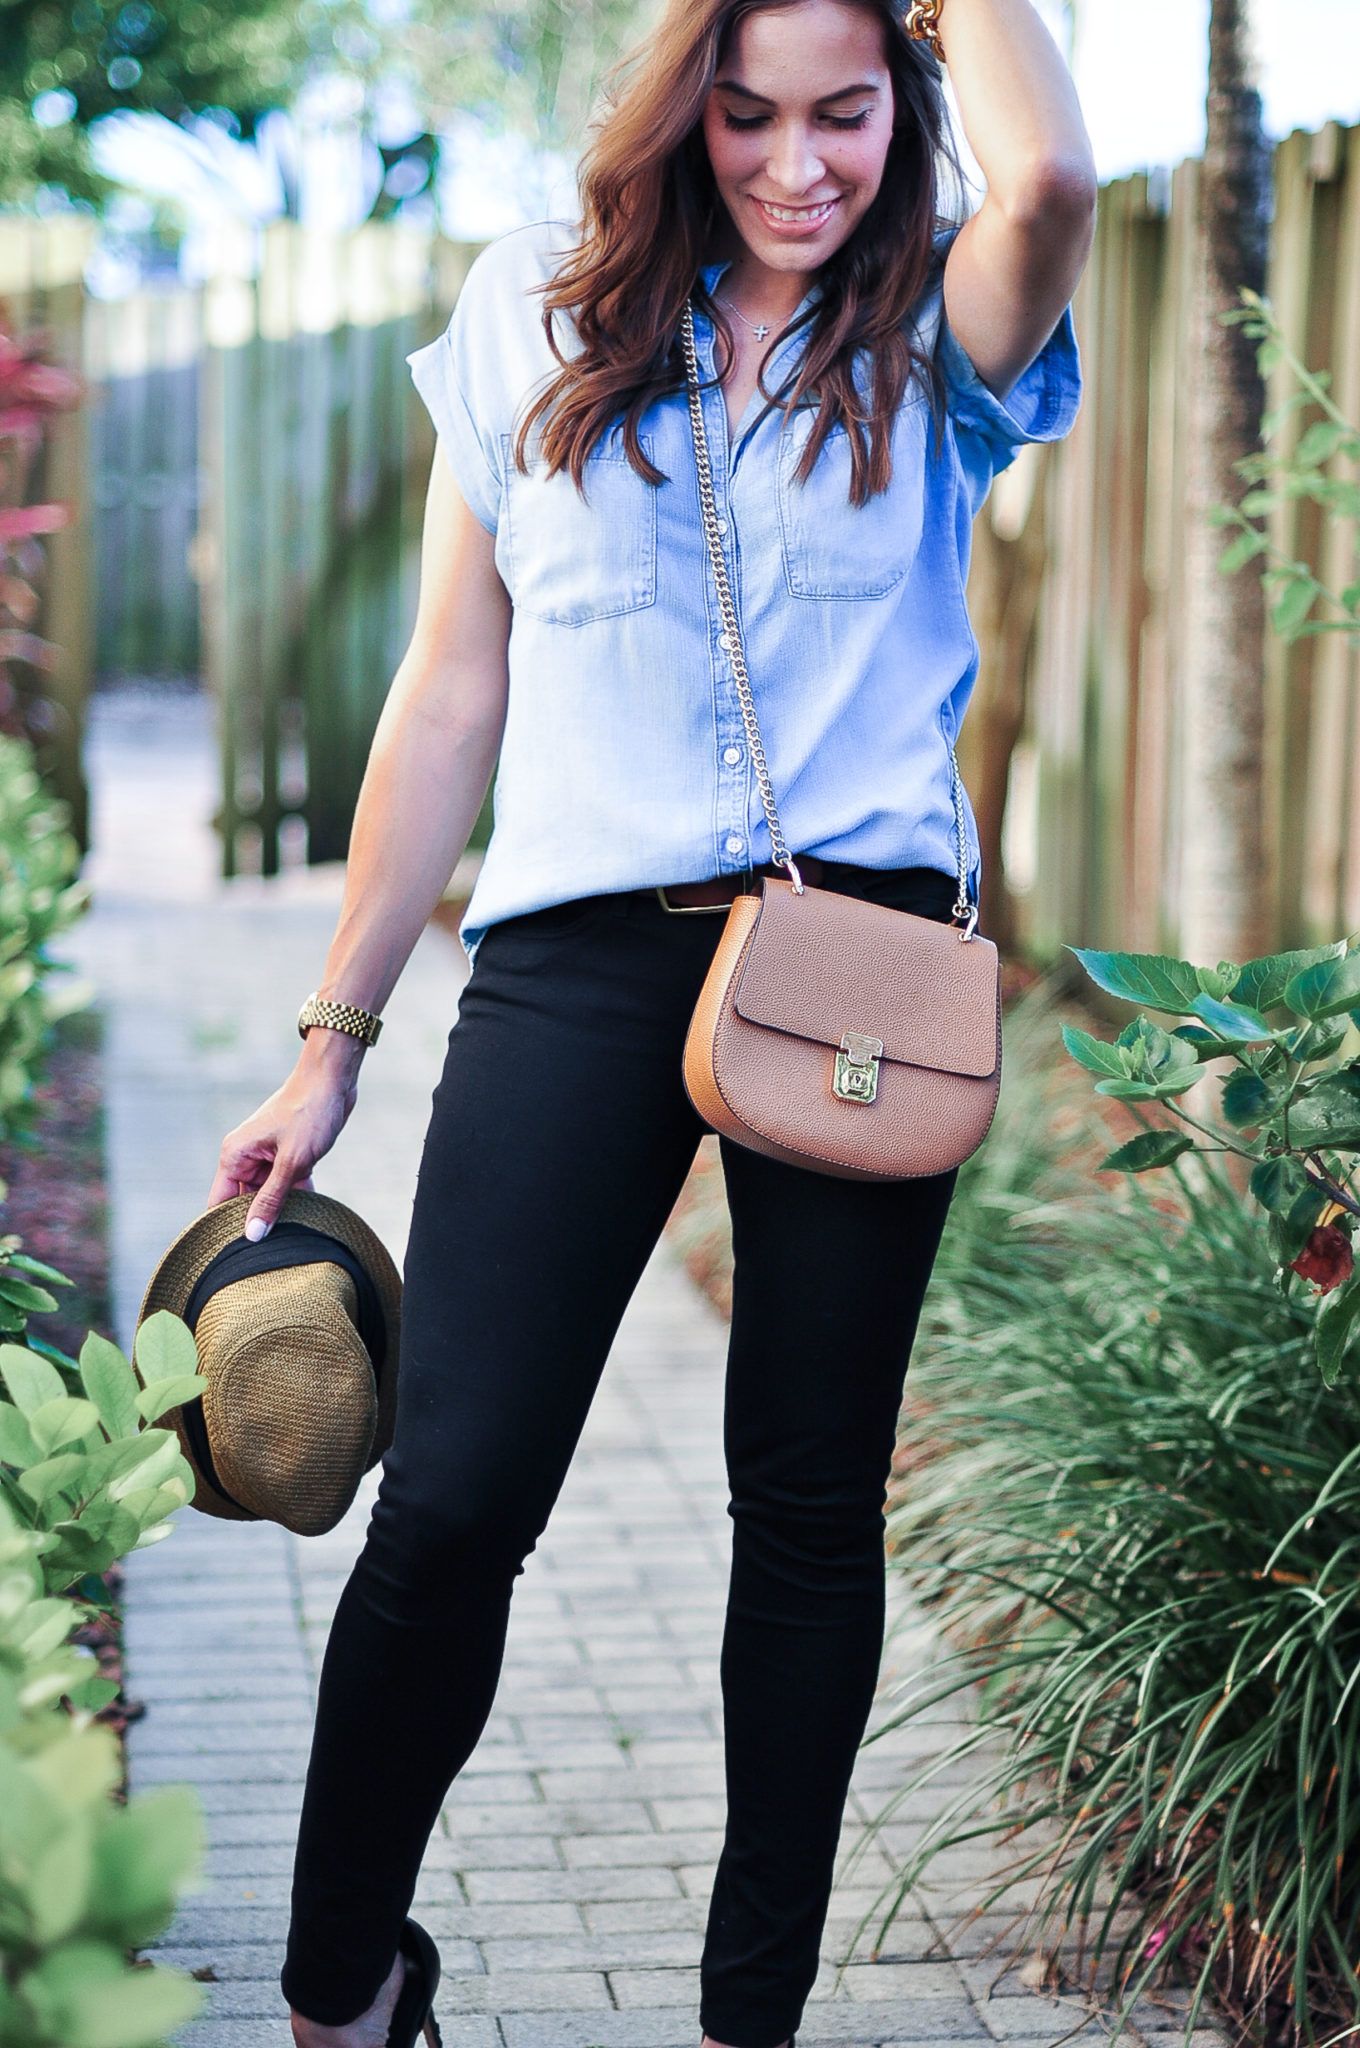 South Florida blogger Amanda wears Bella Dahl chambray and black skinny jeans for a classic look